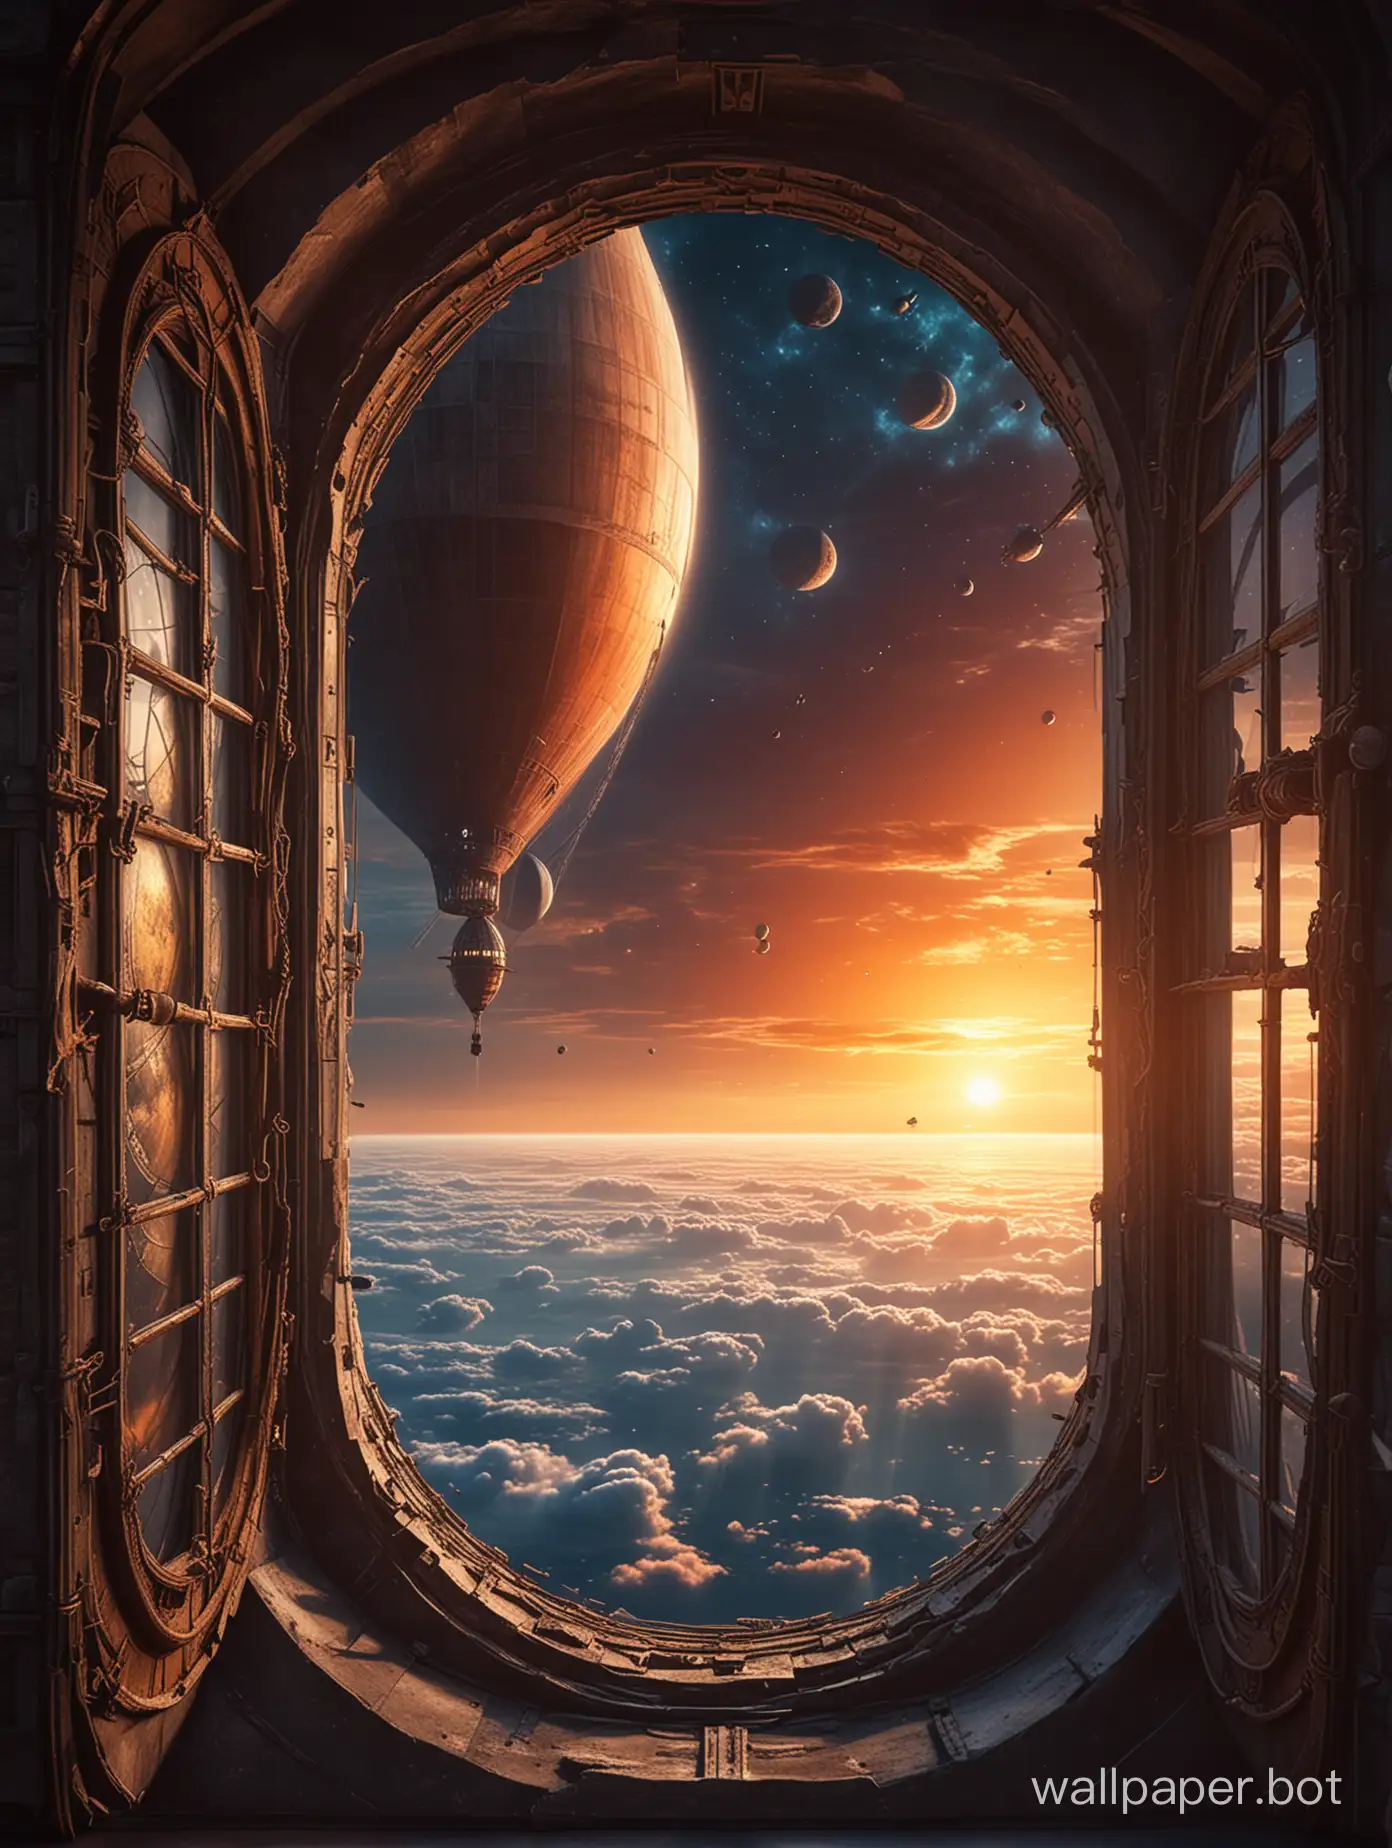 A narrow window into a fantastic space with a planet. Fantastic tower against sunset background. There is an airship with sails in the sky. High resolution. Very definition. Sci-fi.